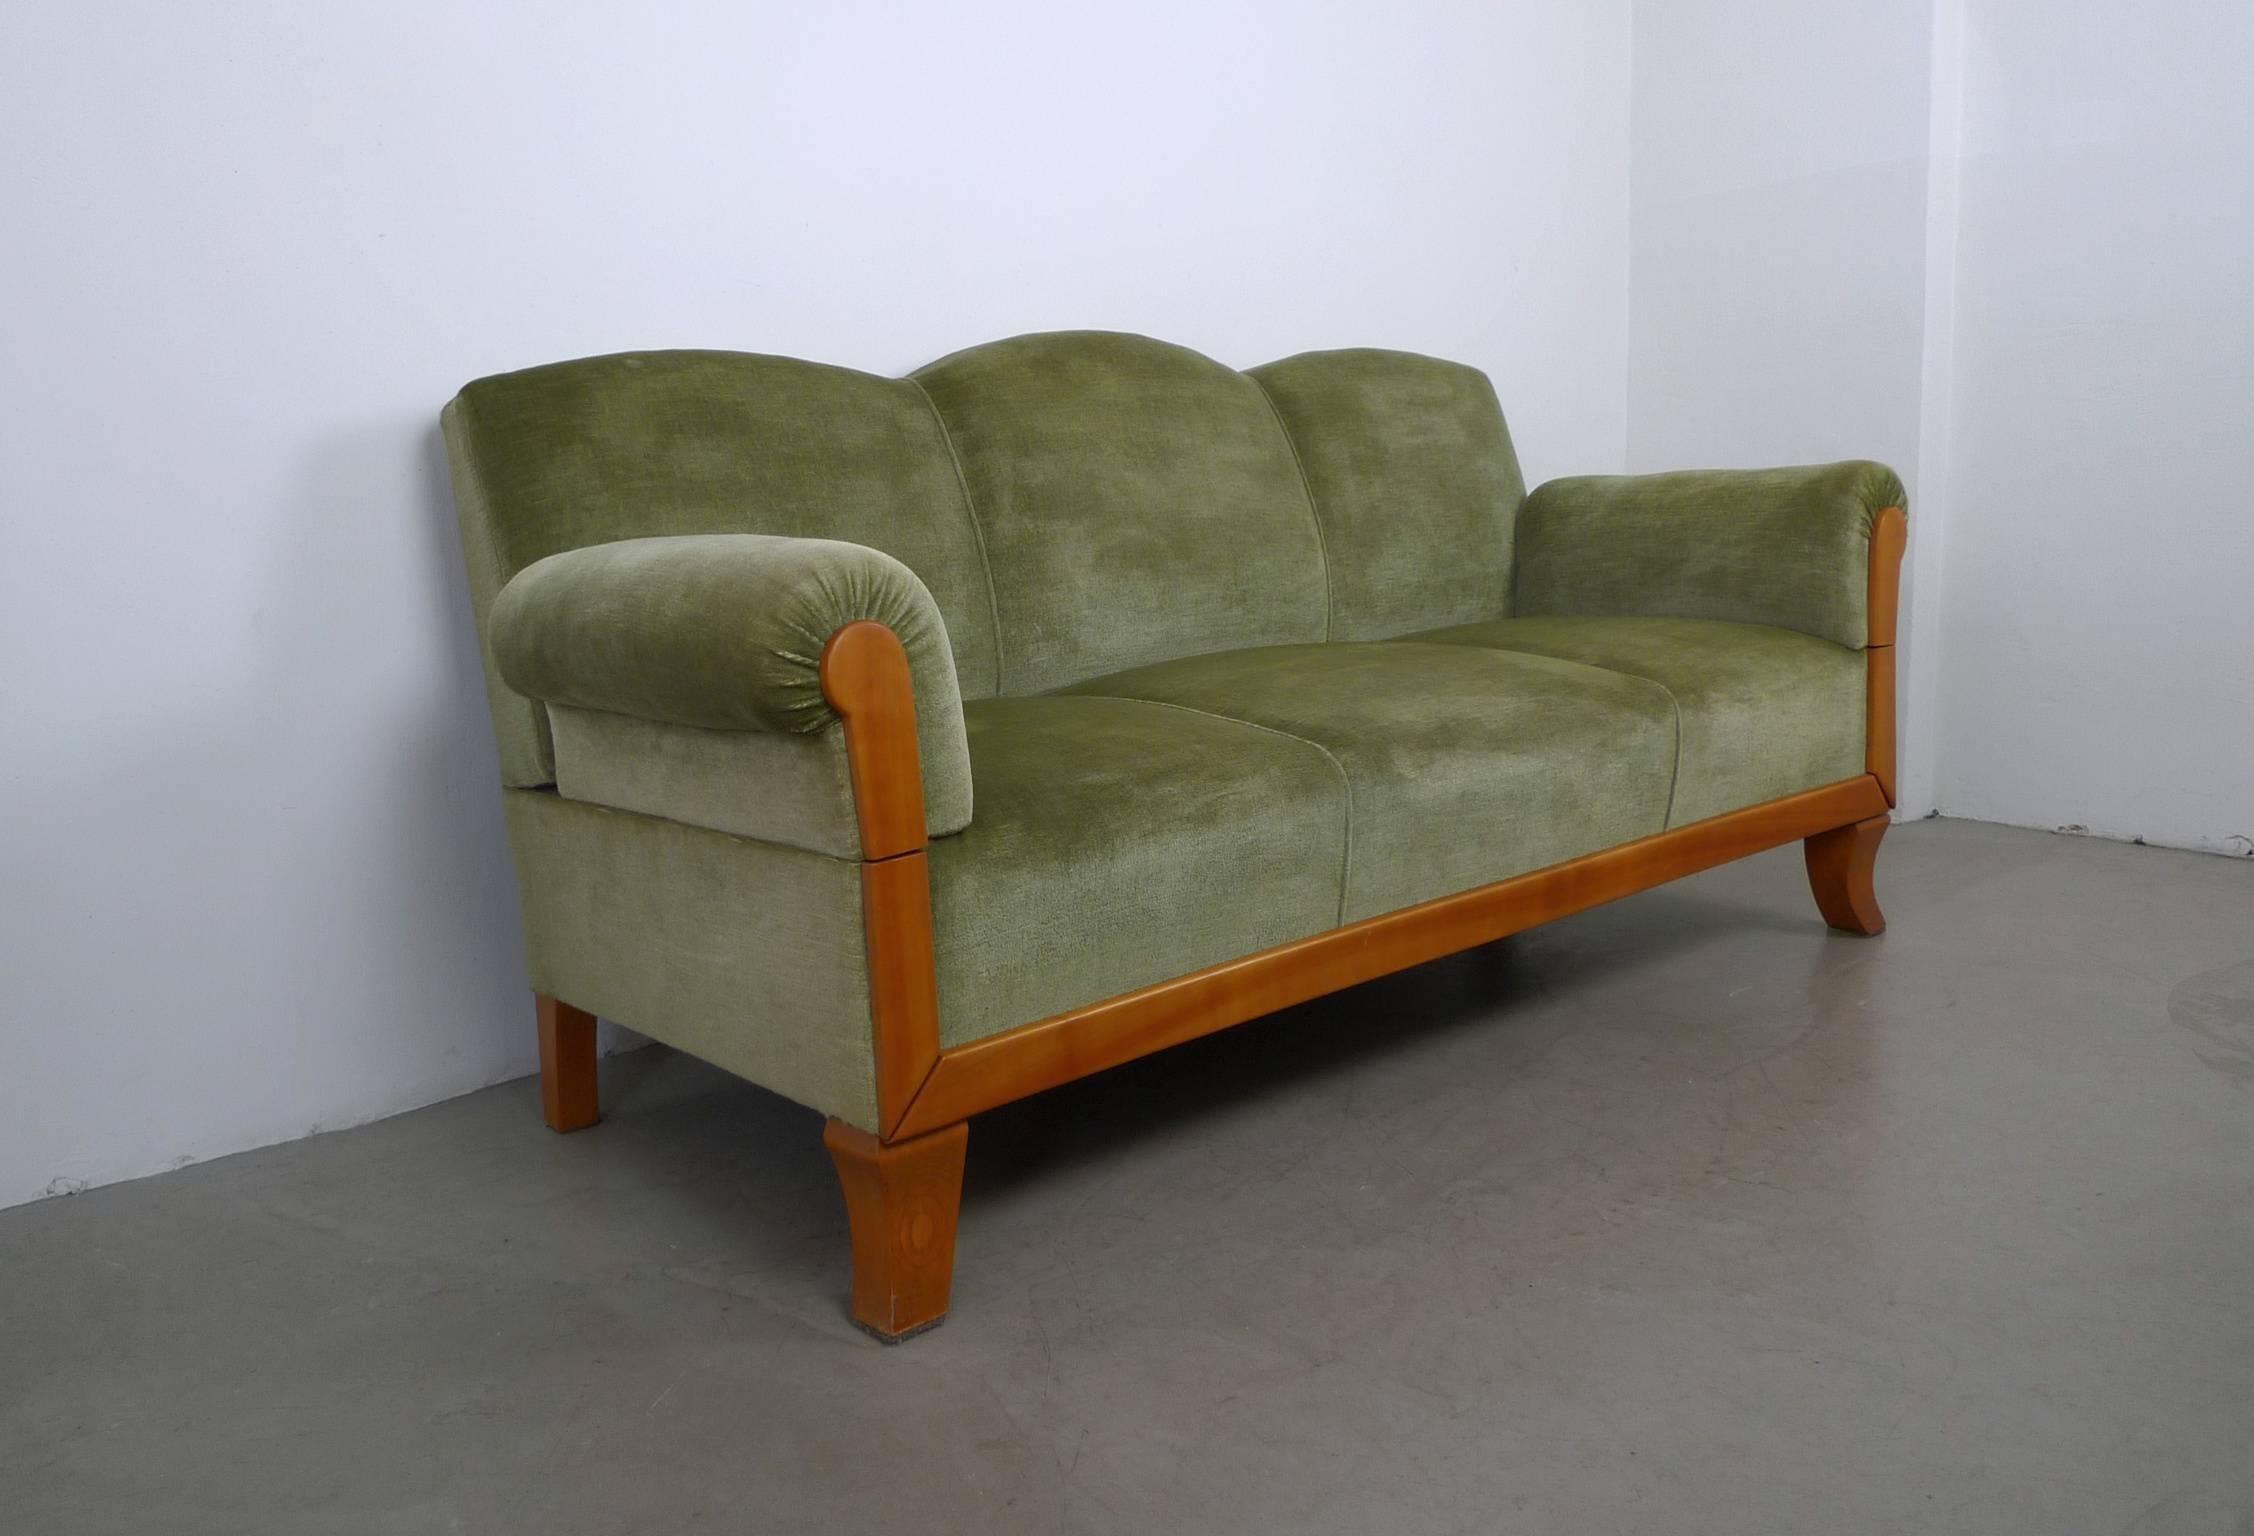 Functional three-seat sofa with a cherry frame from Germany. It is upholstered in green velour fabric and is padded with a spring-cage. Both armrests can be locked into three different positions on the brackets or completely removed for sleeping.